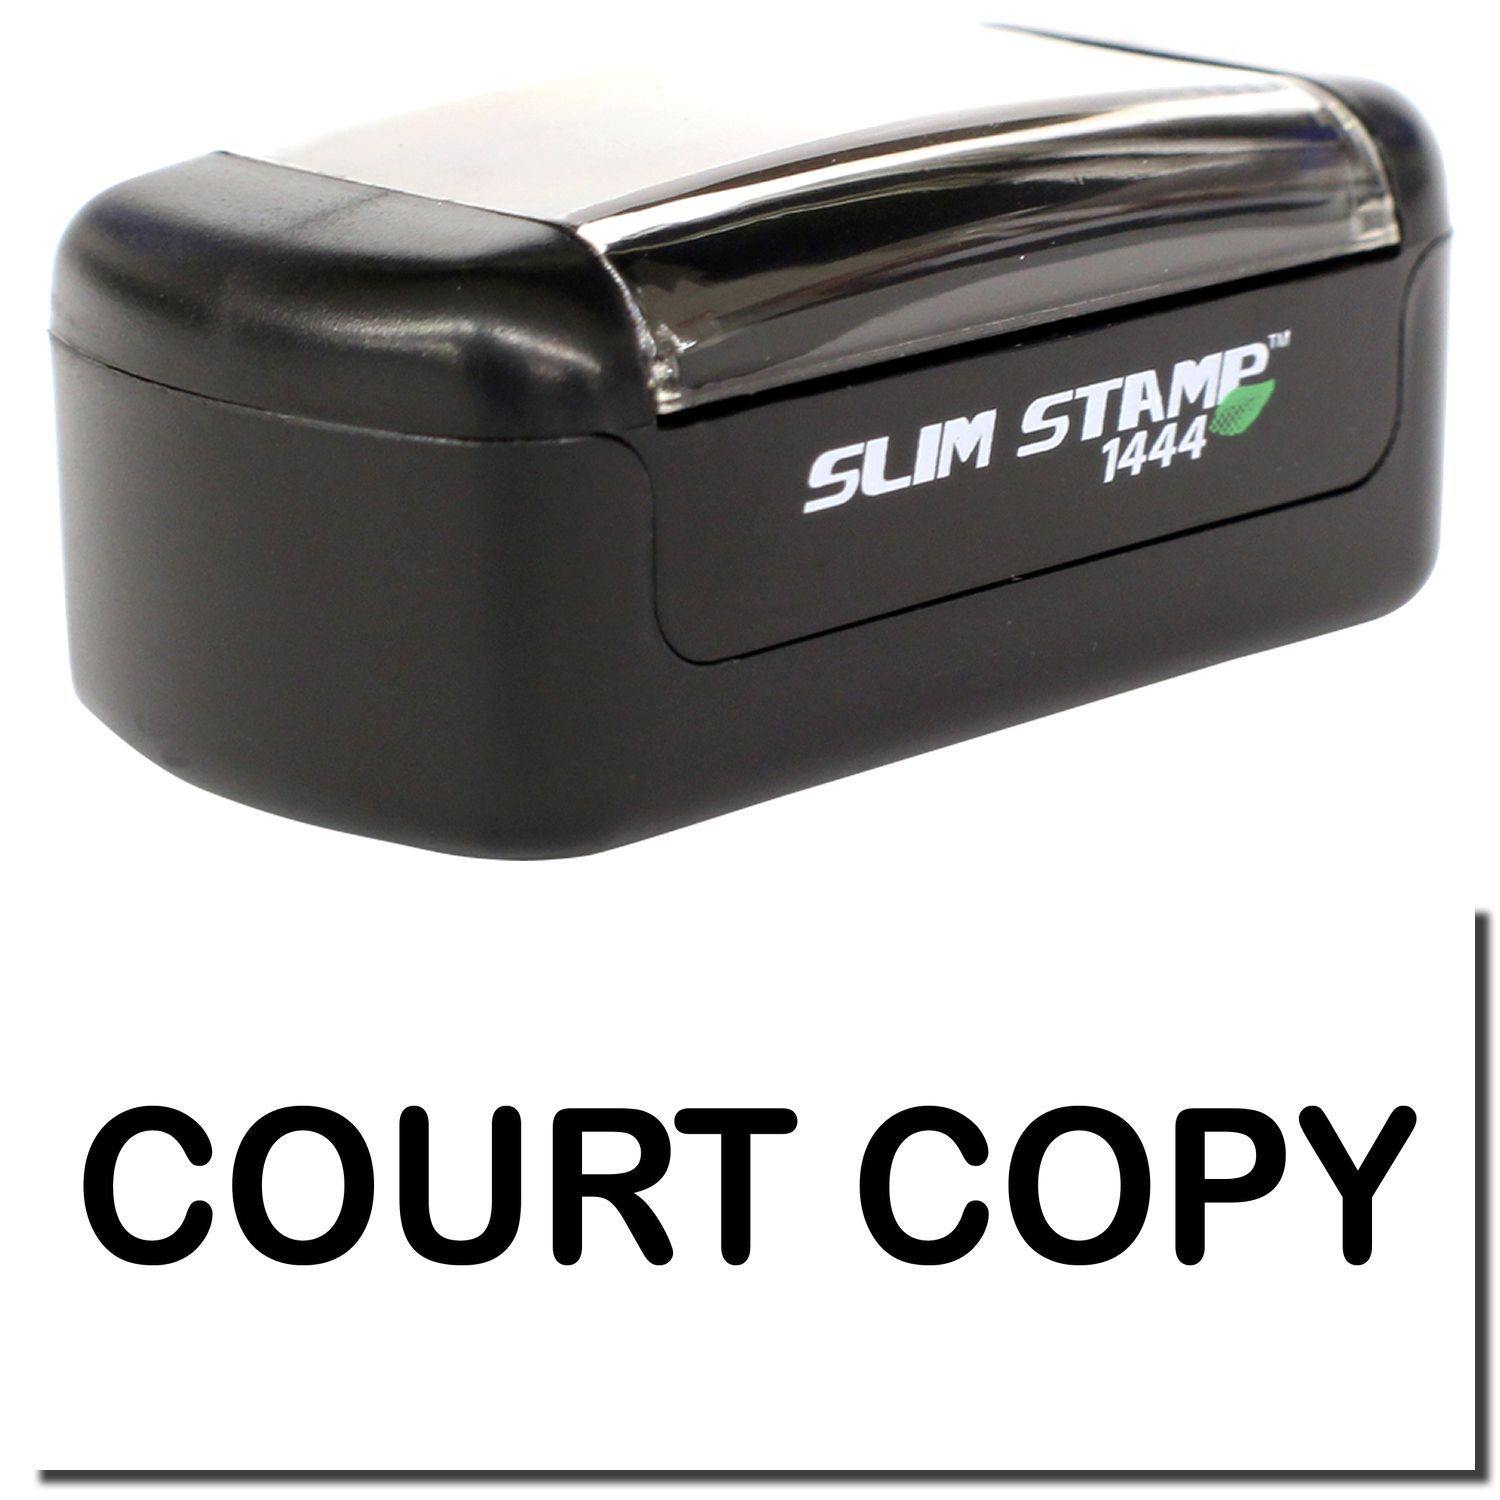 A stock office pre-inked stamp with a stamped image showing how the text "COURT COPY" is displayed after stamping.